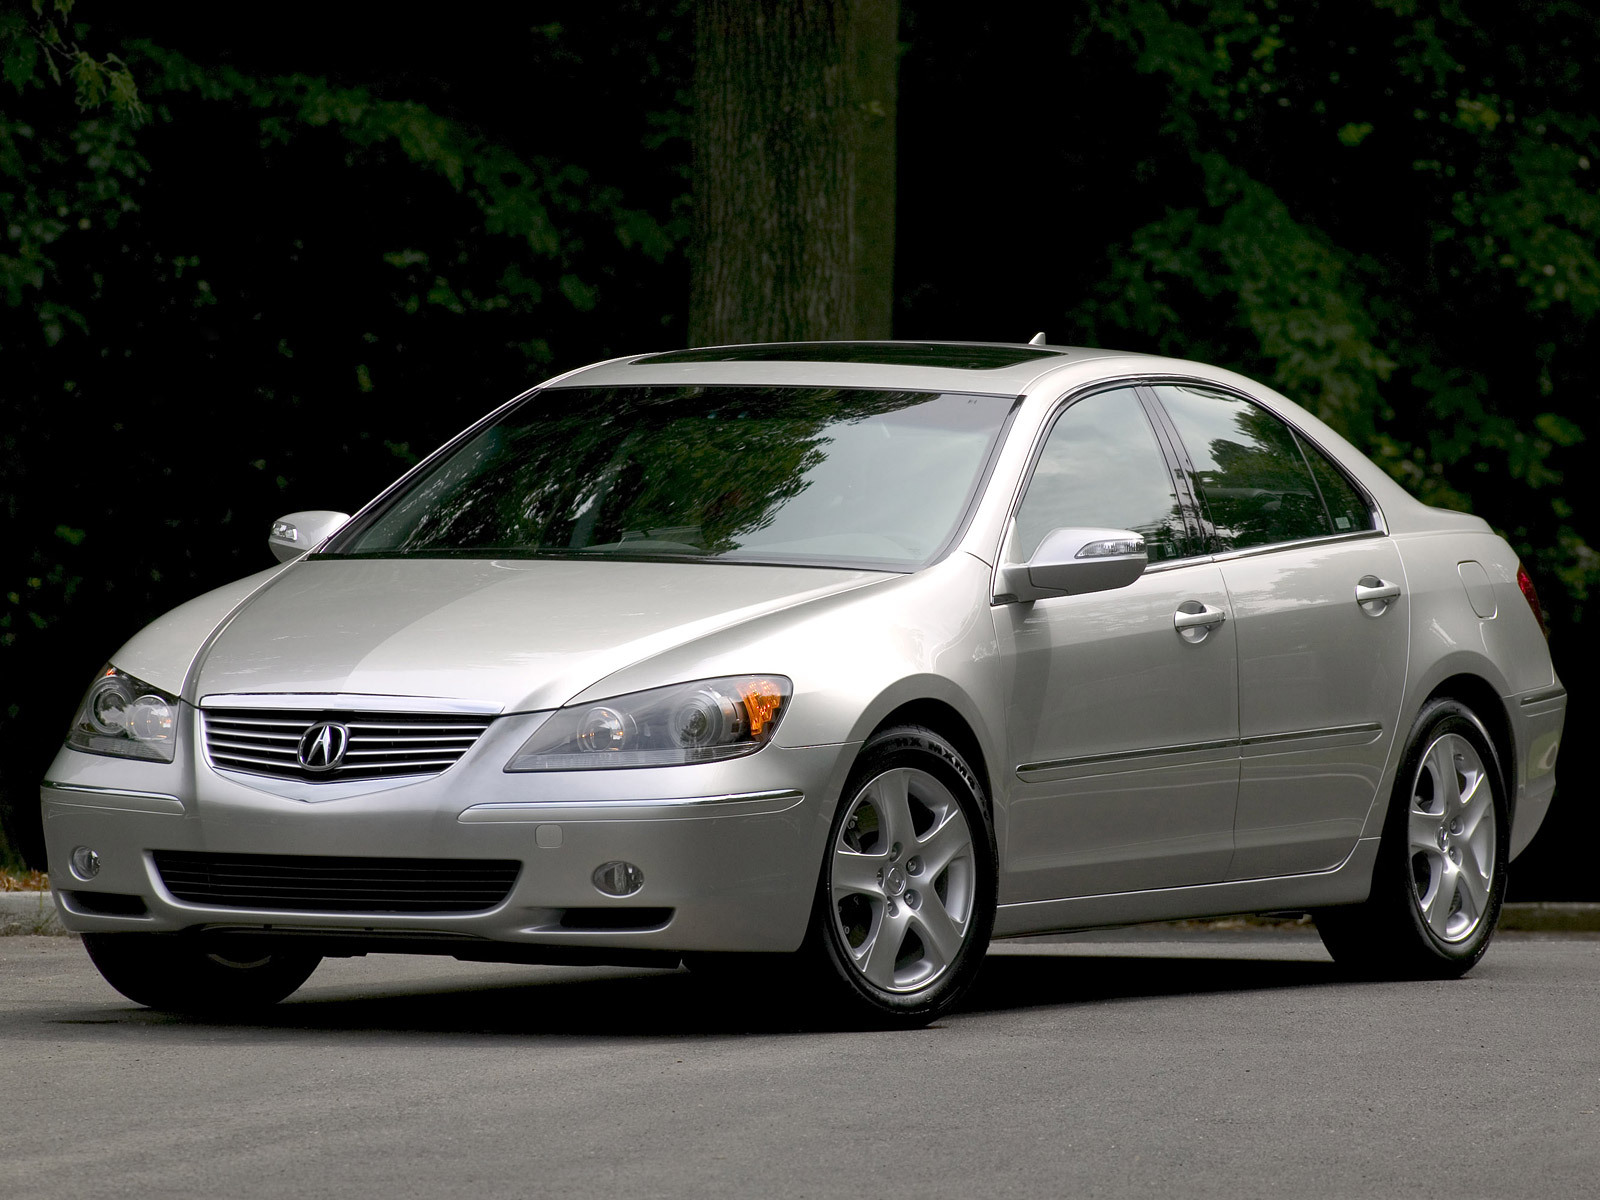 Wallpapers Of Acura Rl Cars And Acura Cars Wallpapers | Wallpapers ...